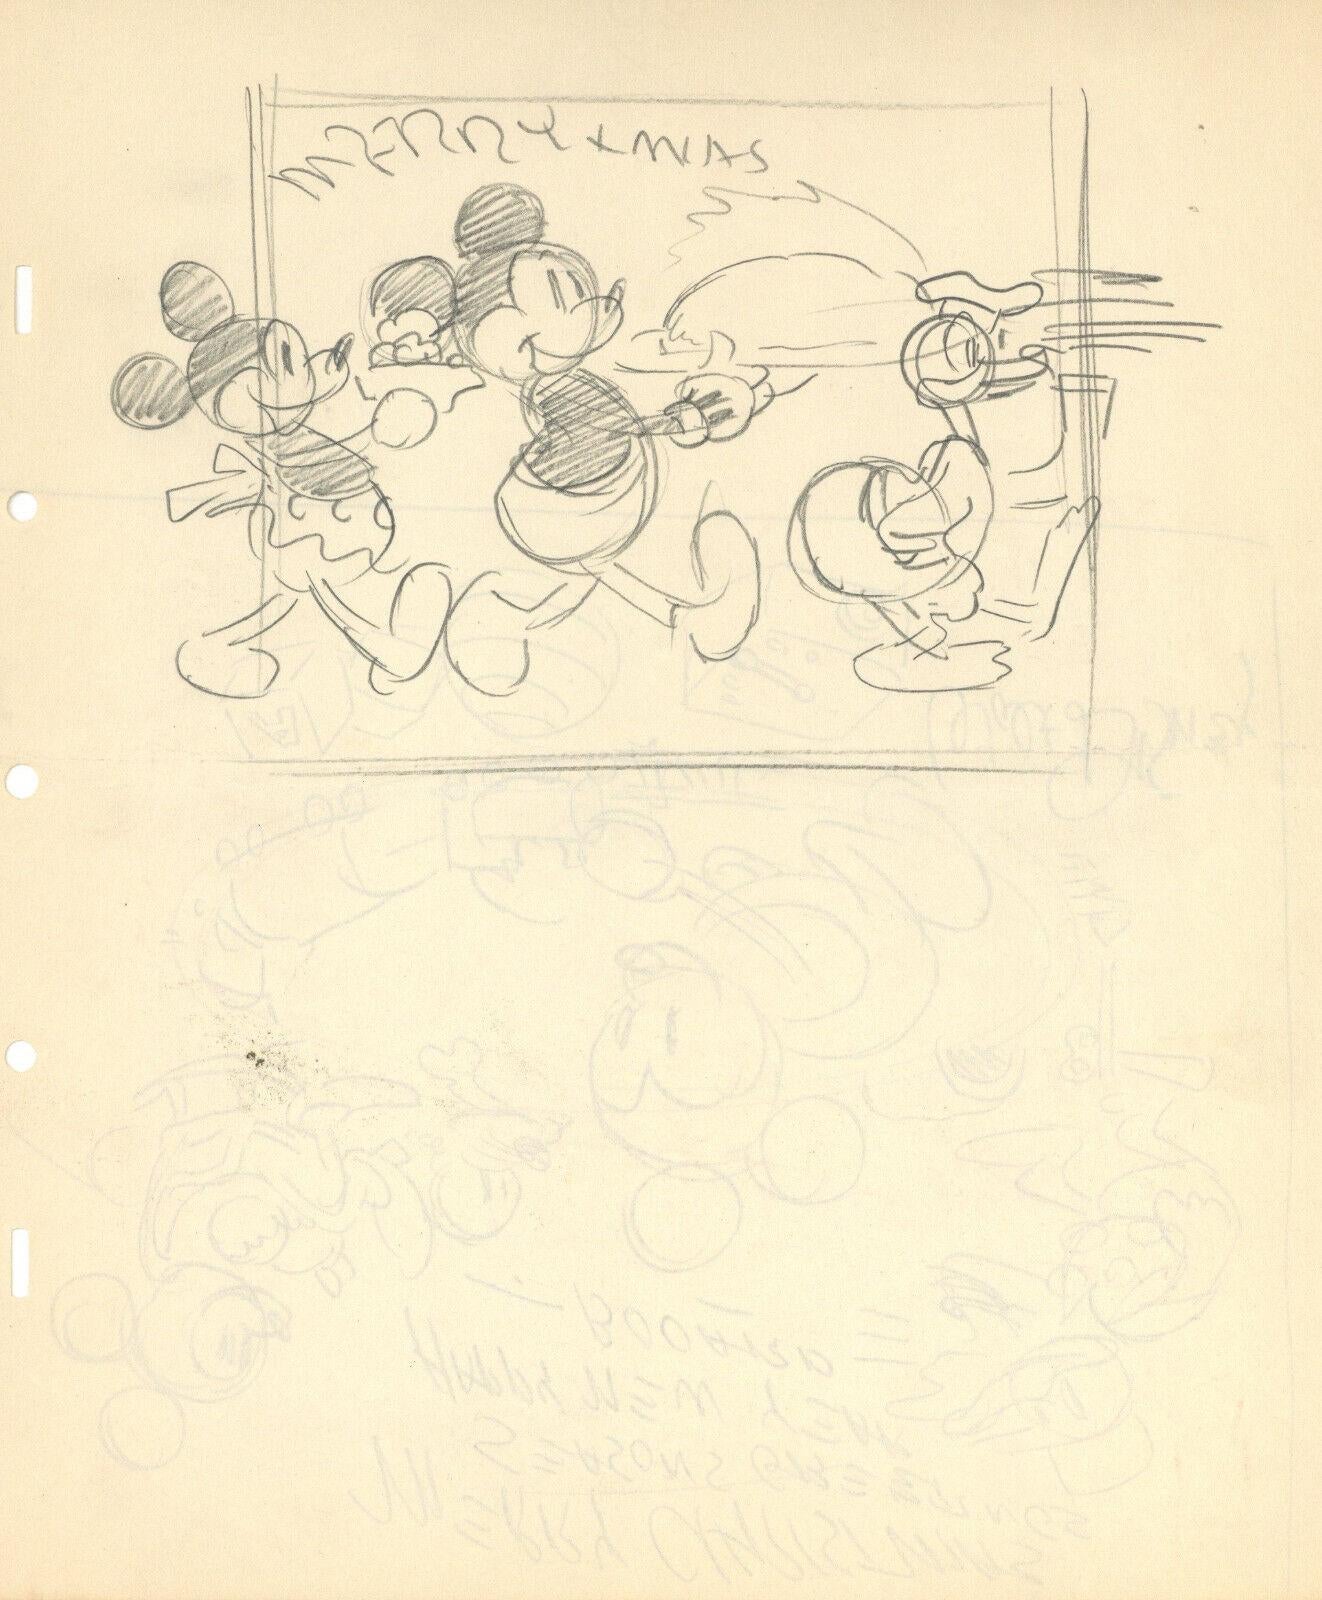 Up for sale is an original concept drawing by a Disney Animator for Walt Disney's Christmas card.  Back in the day, around the holiday's, Walt had two types of cards - a holiday card and a Christmas card.  What he did was solicit his animators to